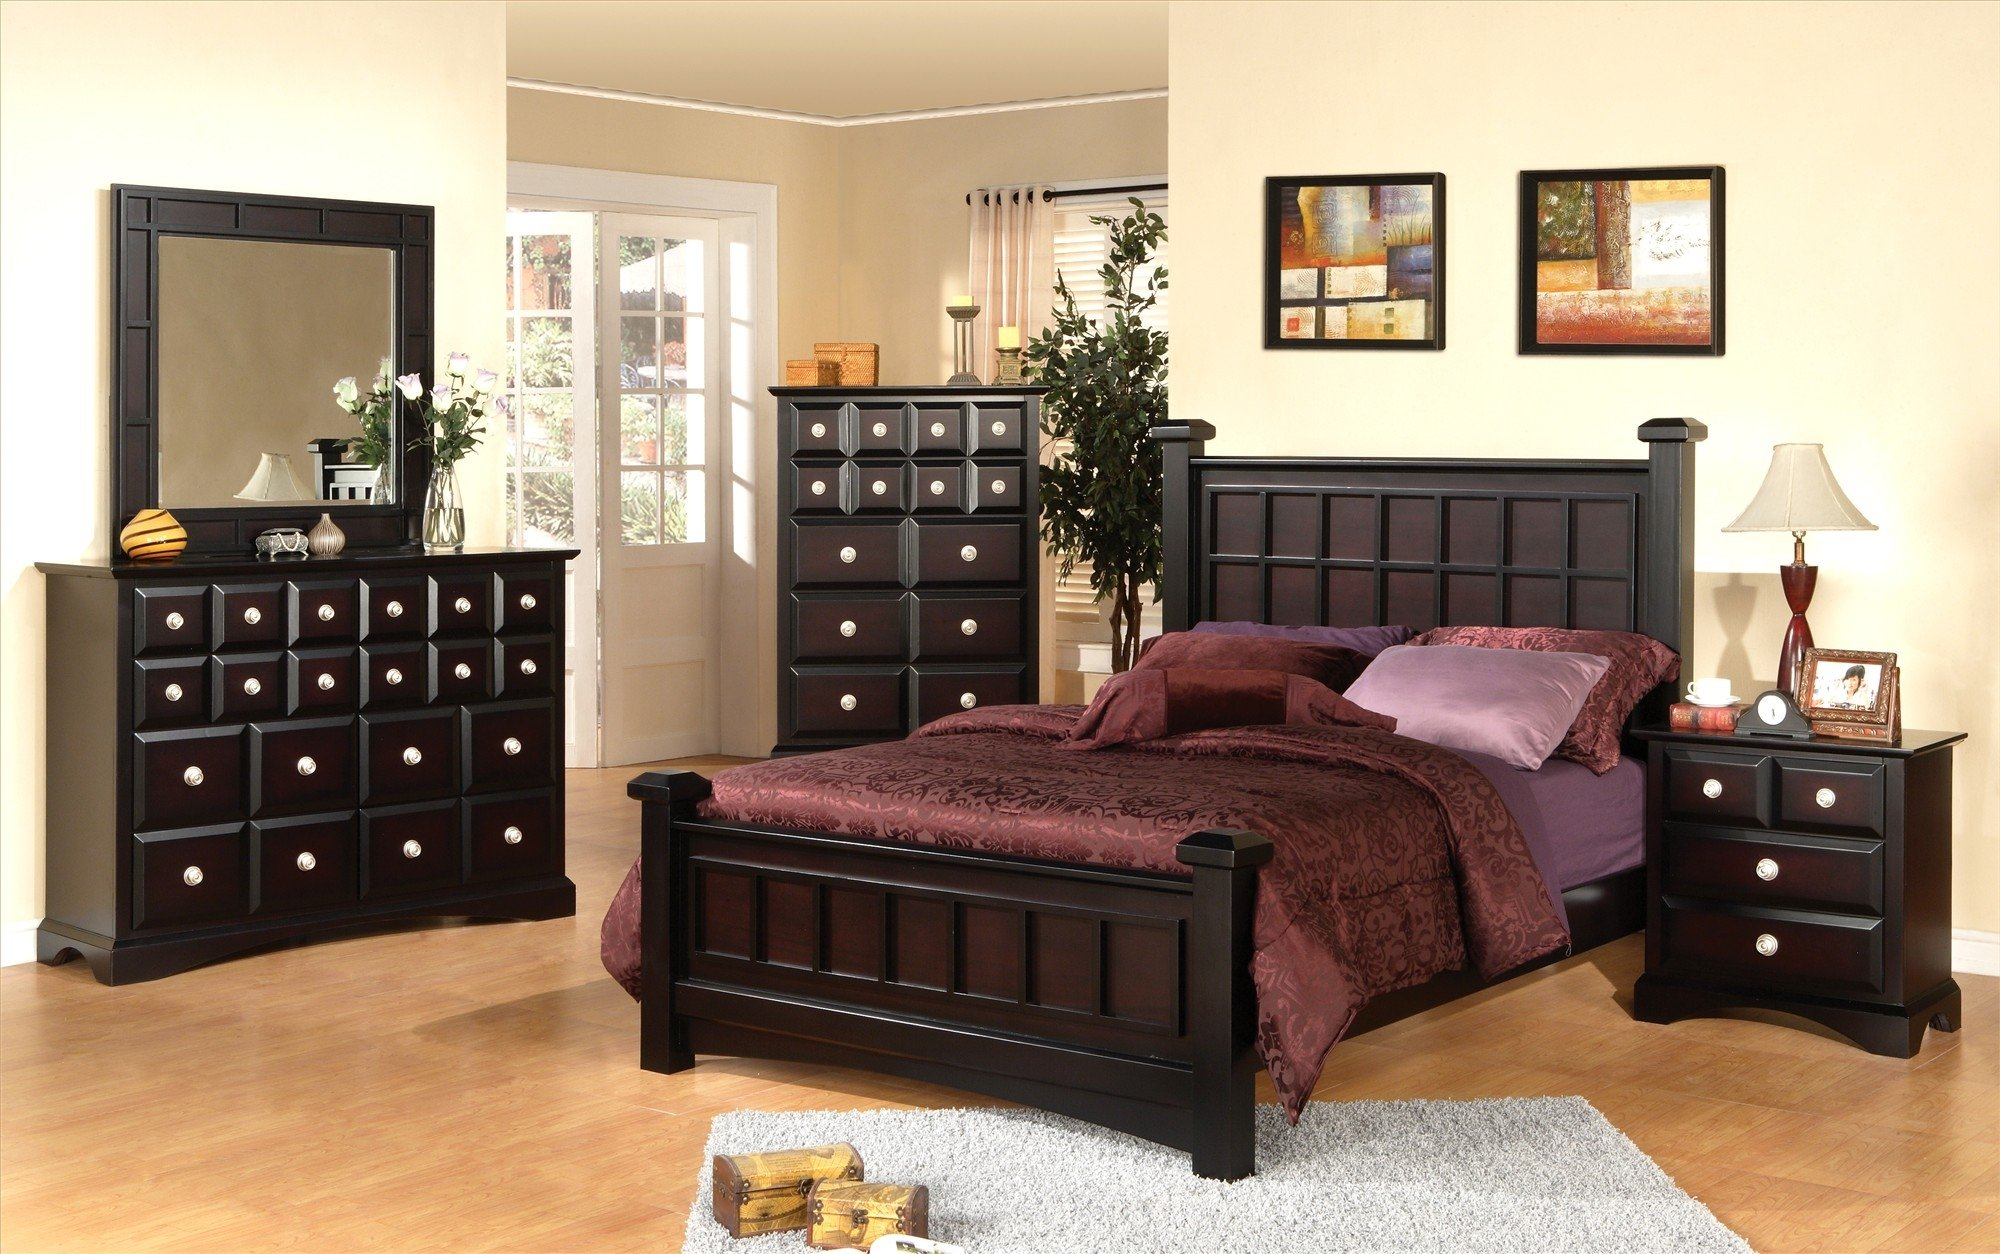 Black Wood Bedroom Set Double Bedroom Furniture Sets Raya Furniture within dimensions 2000 X 1254